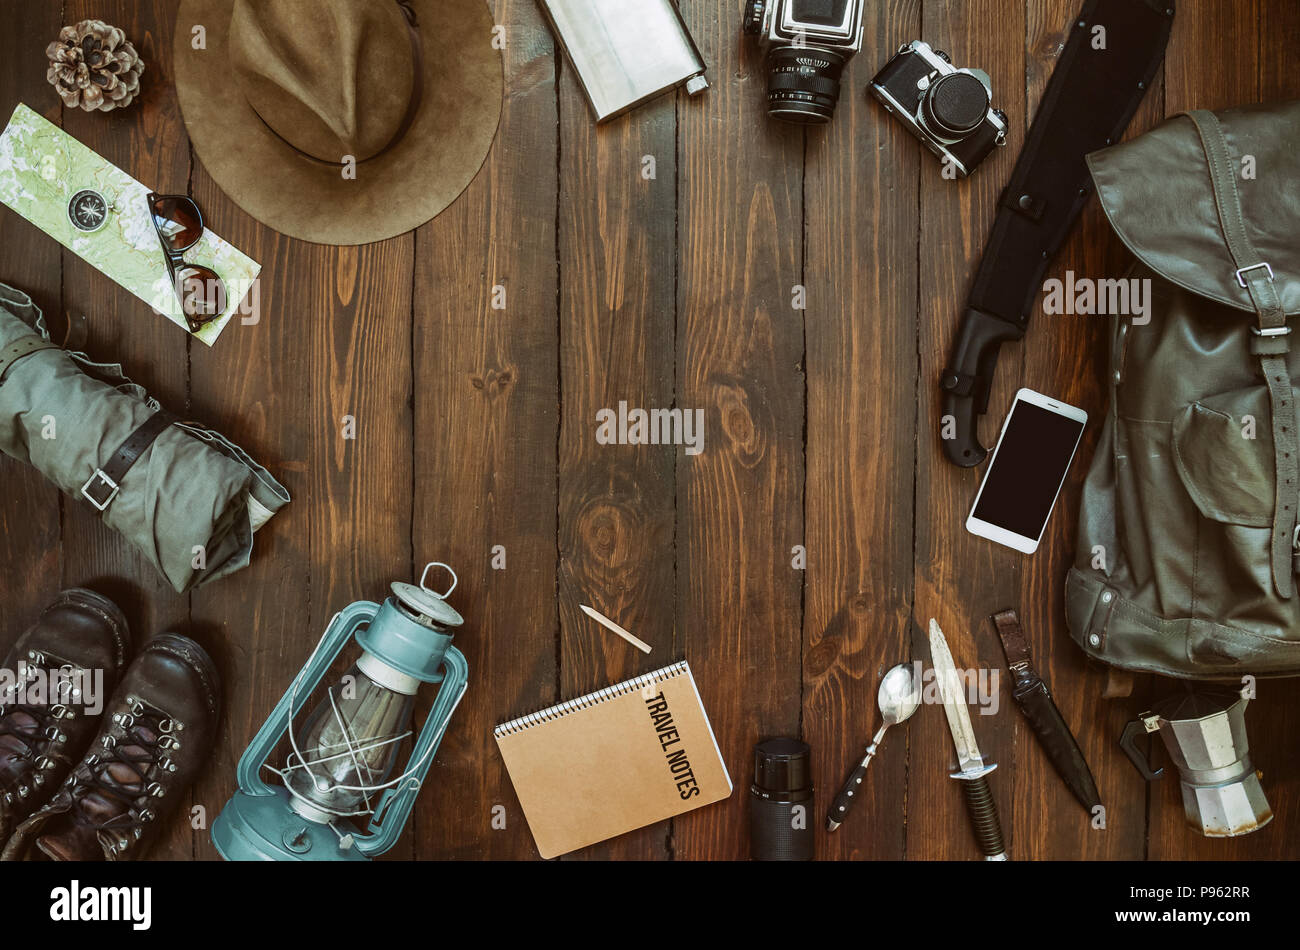 Hiking gear frame including machete, knife, clothes, boots, lantern, camera, hat, map, compass, mobile phone. Wanderlust, safari postcard, poster. Stock Photo